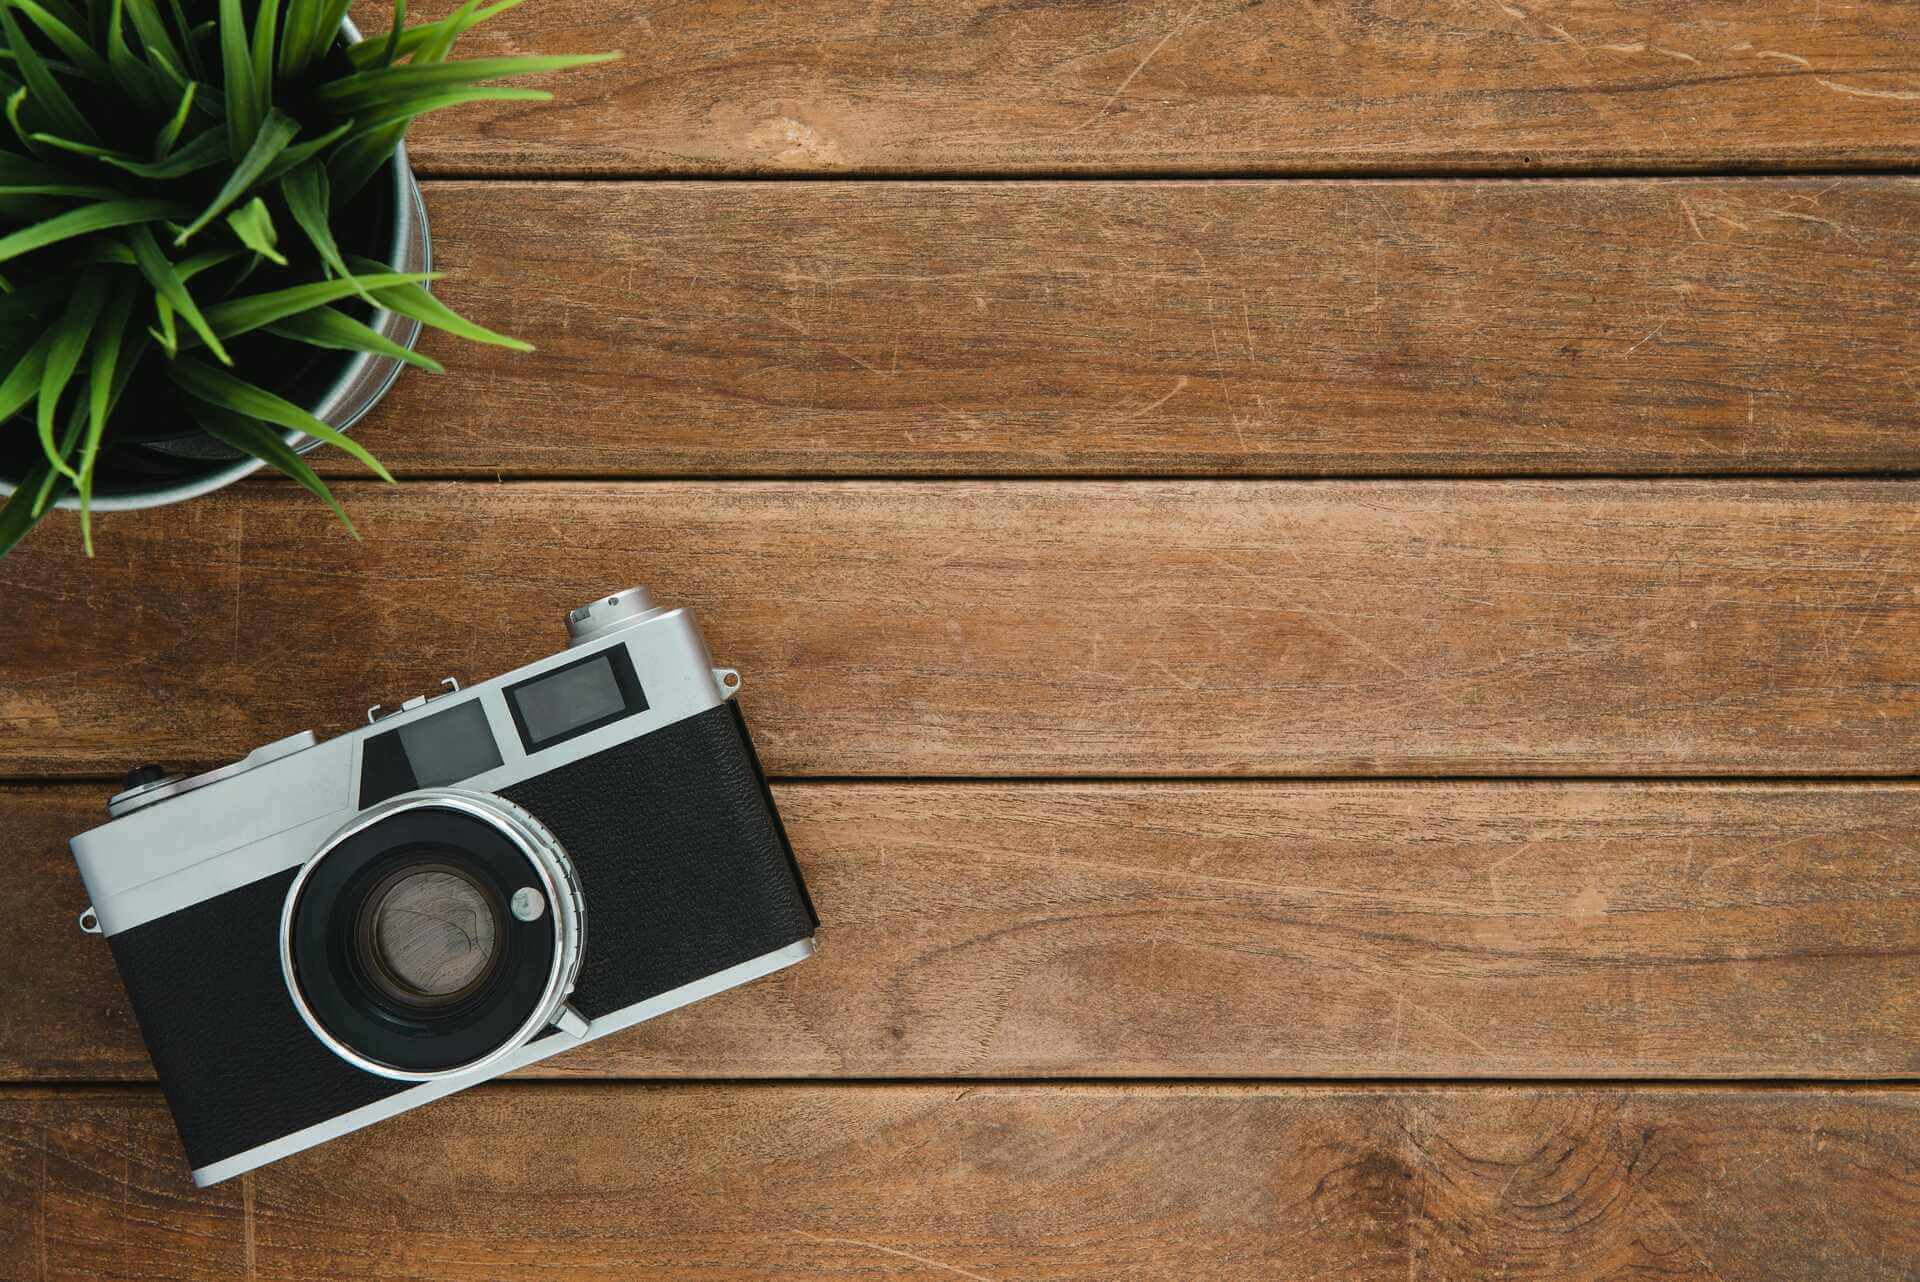  A camera on a wooden background